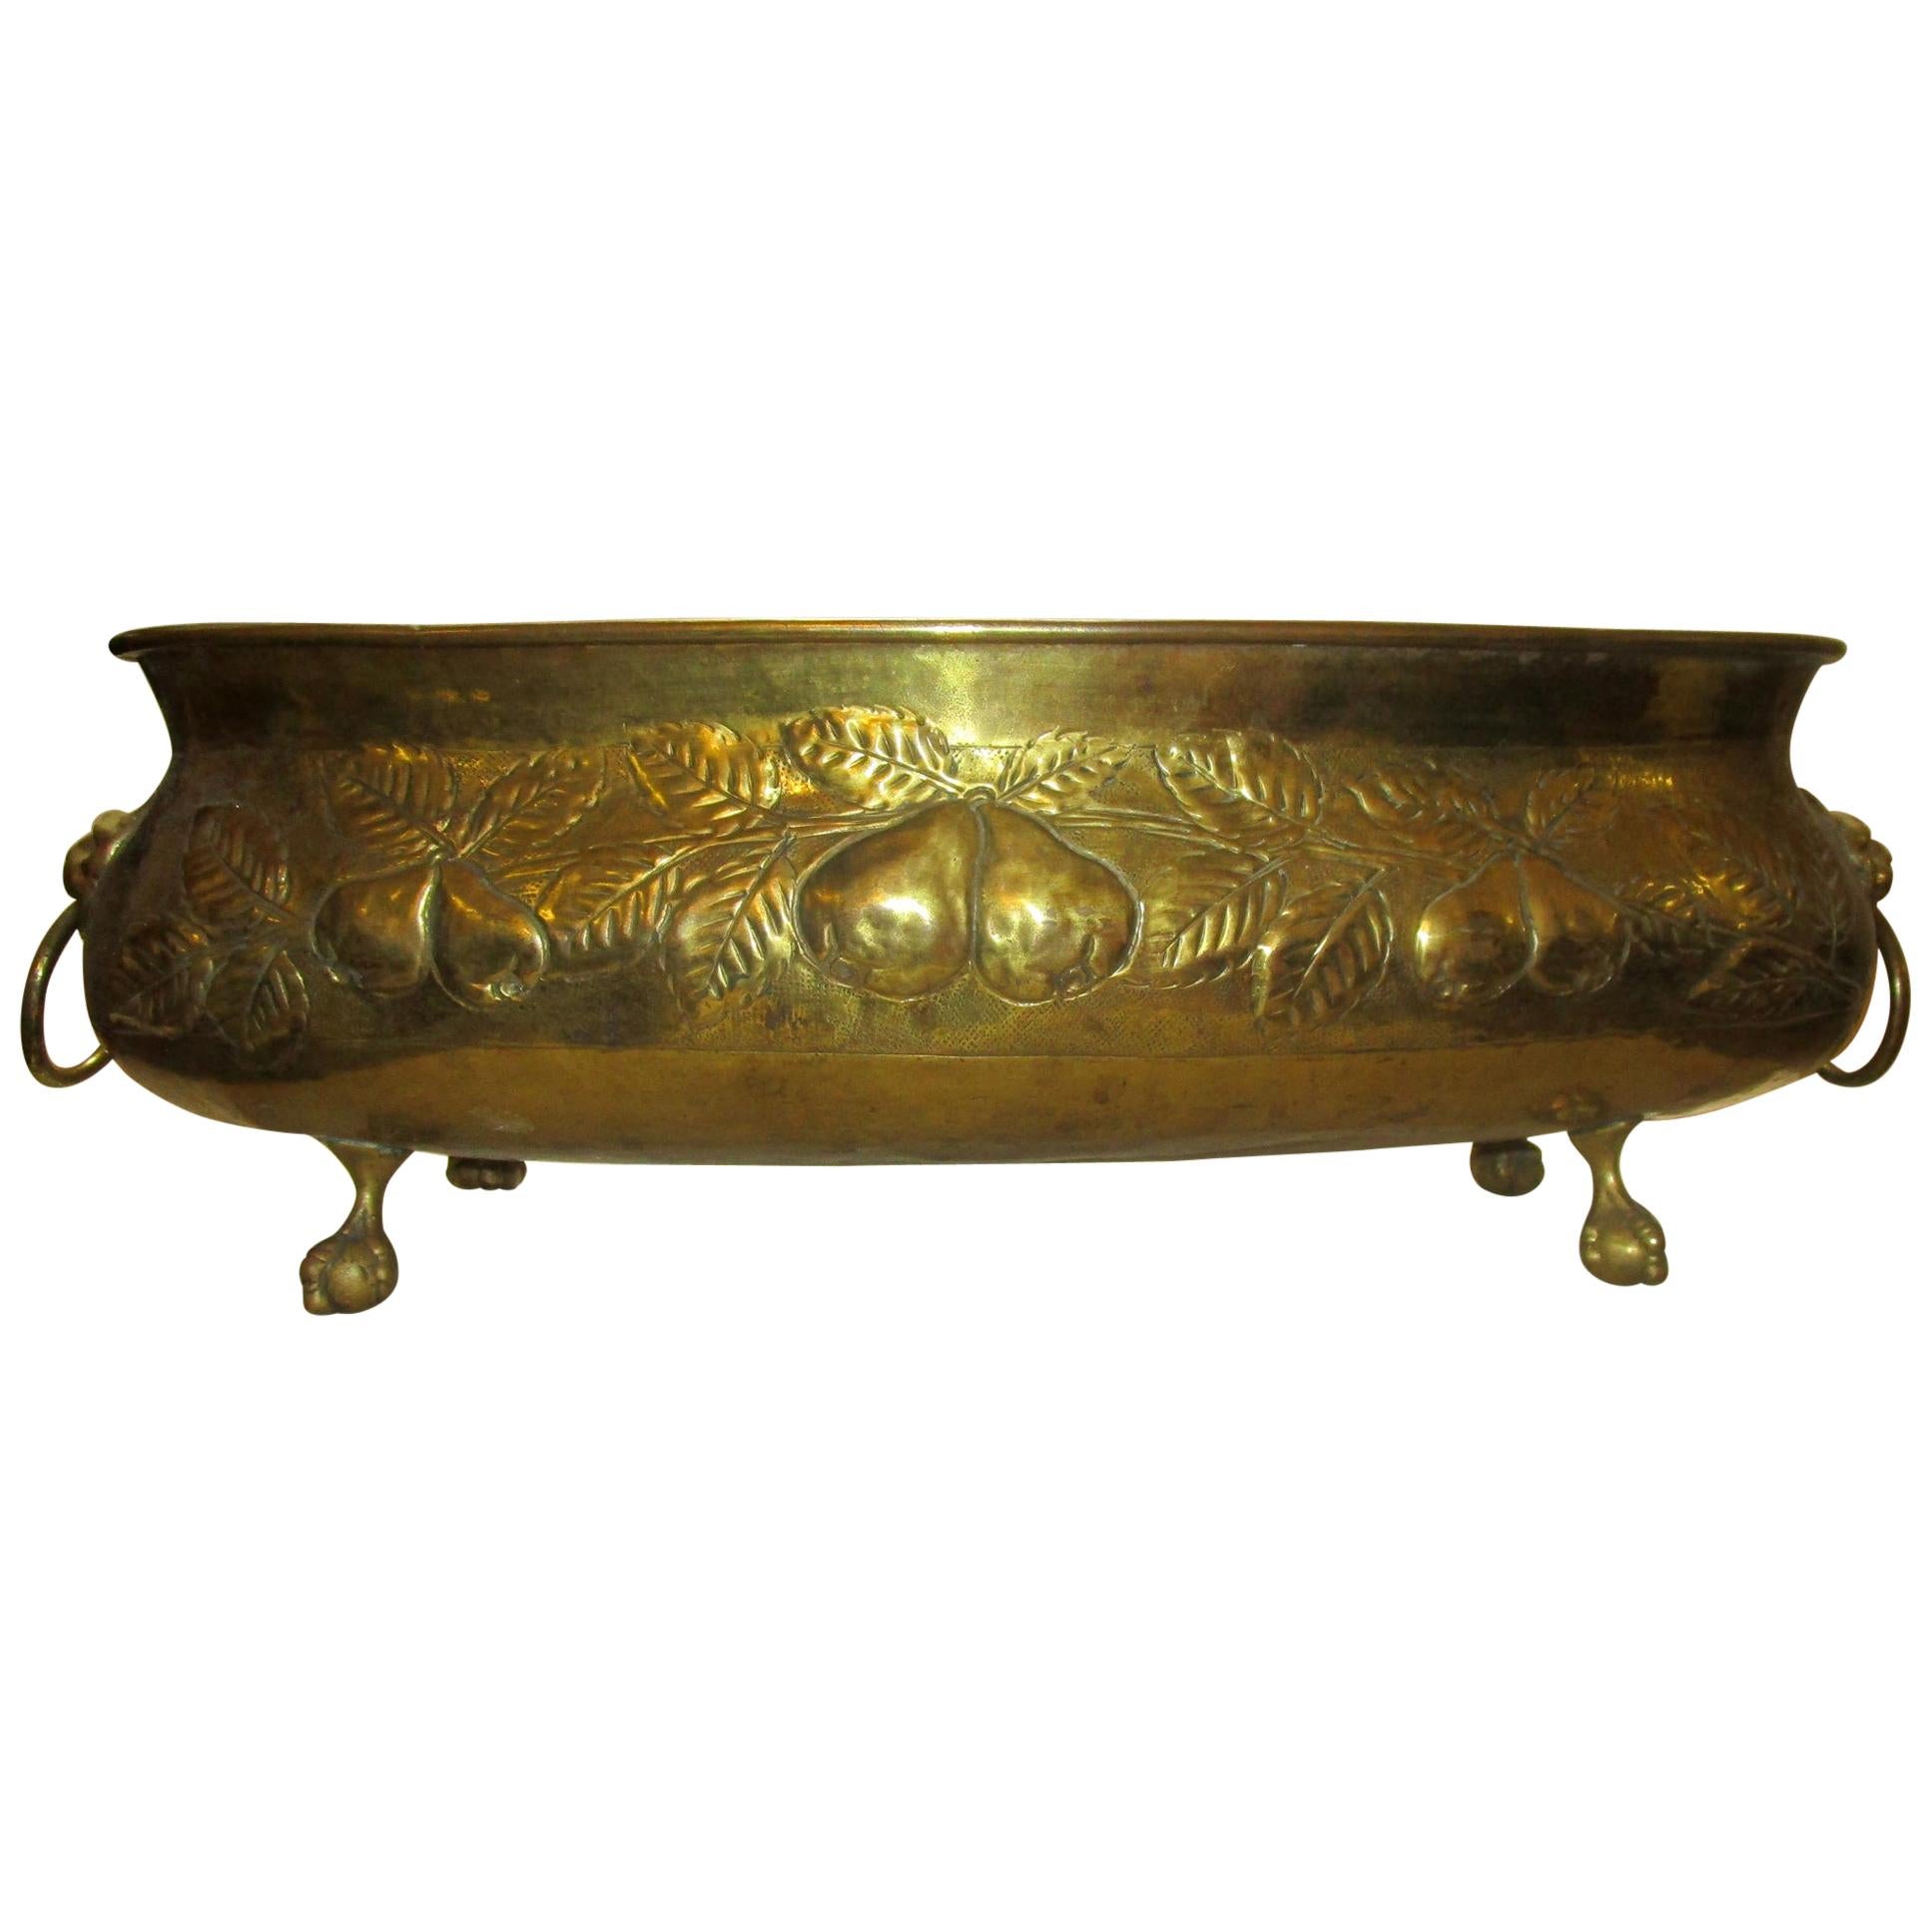 19th Century Brass Oval Jardinière or Planter with Fruit Motif